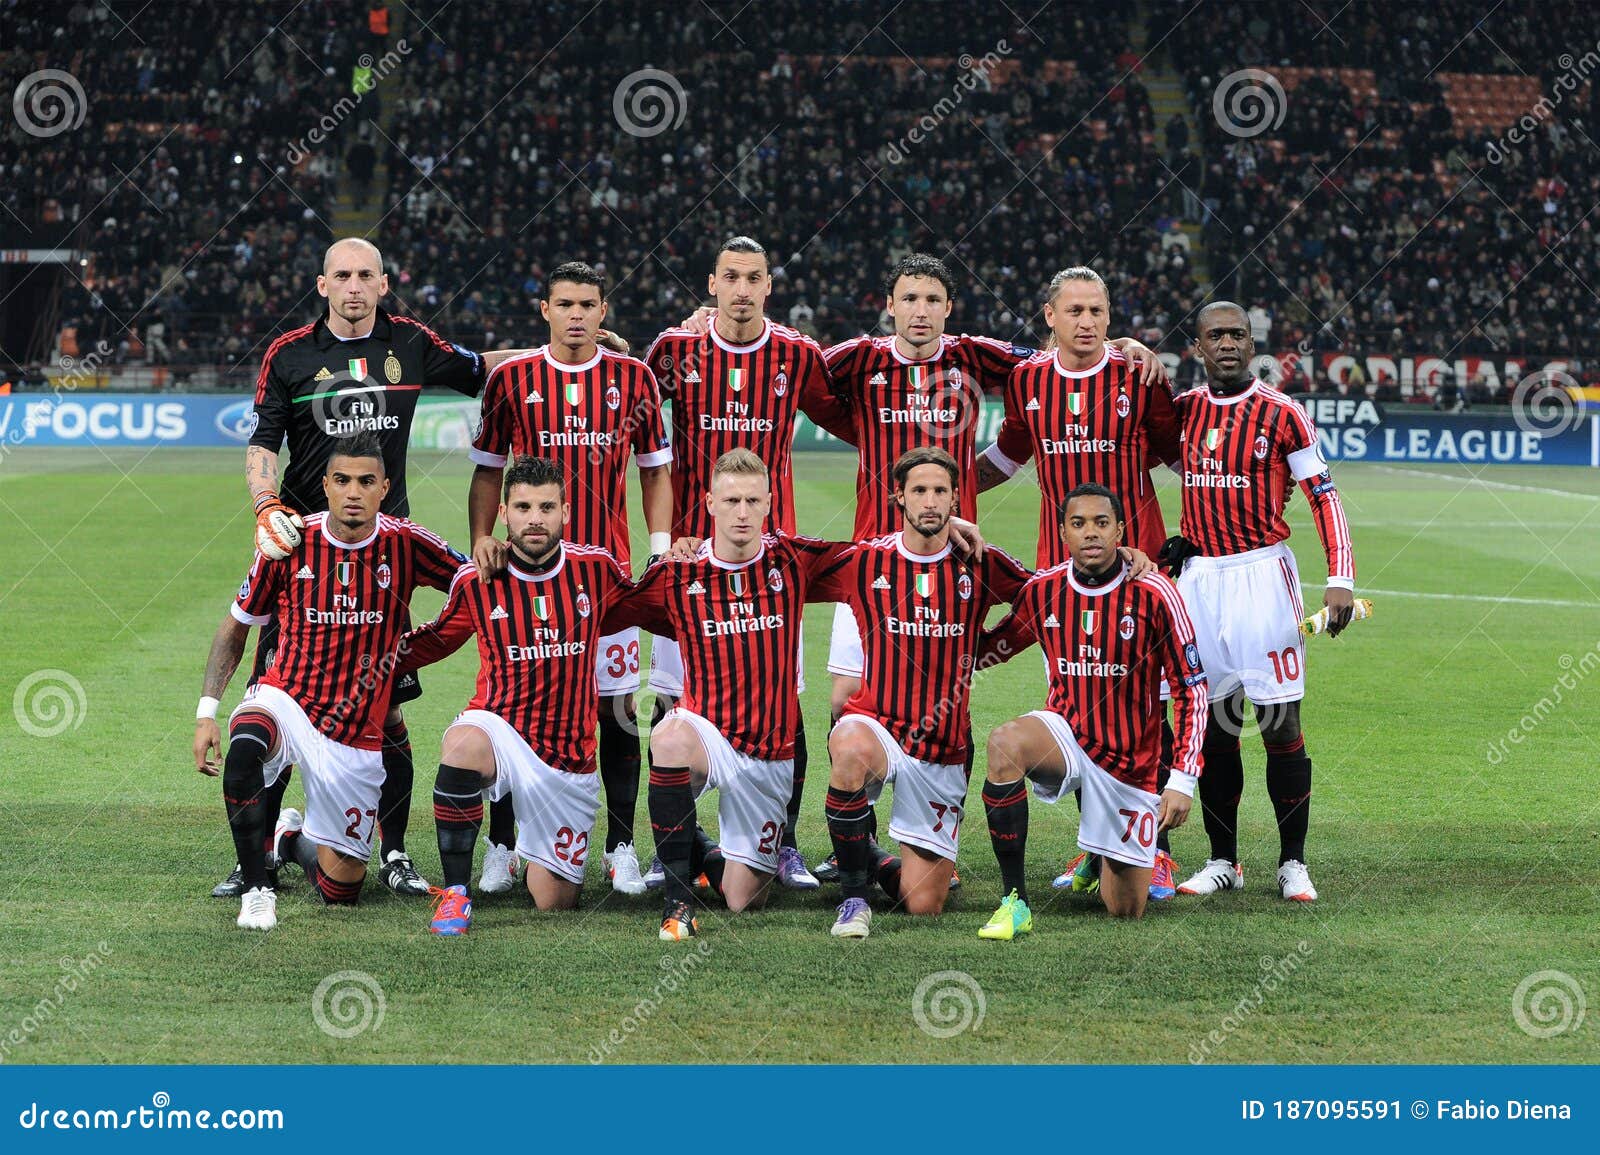 Milan Players before the Match Photo - Image of 20112012: 187095591